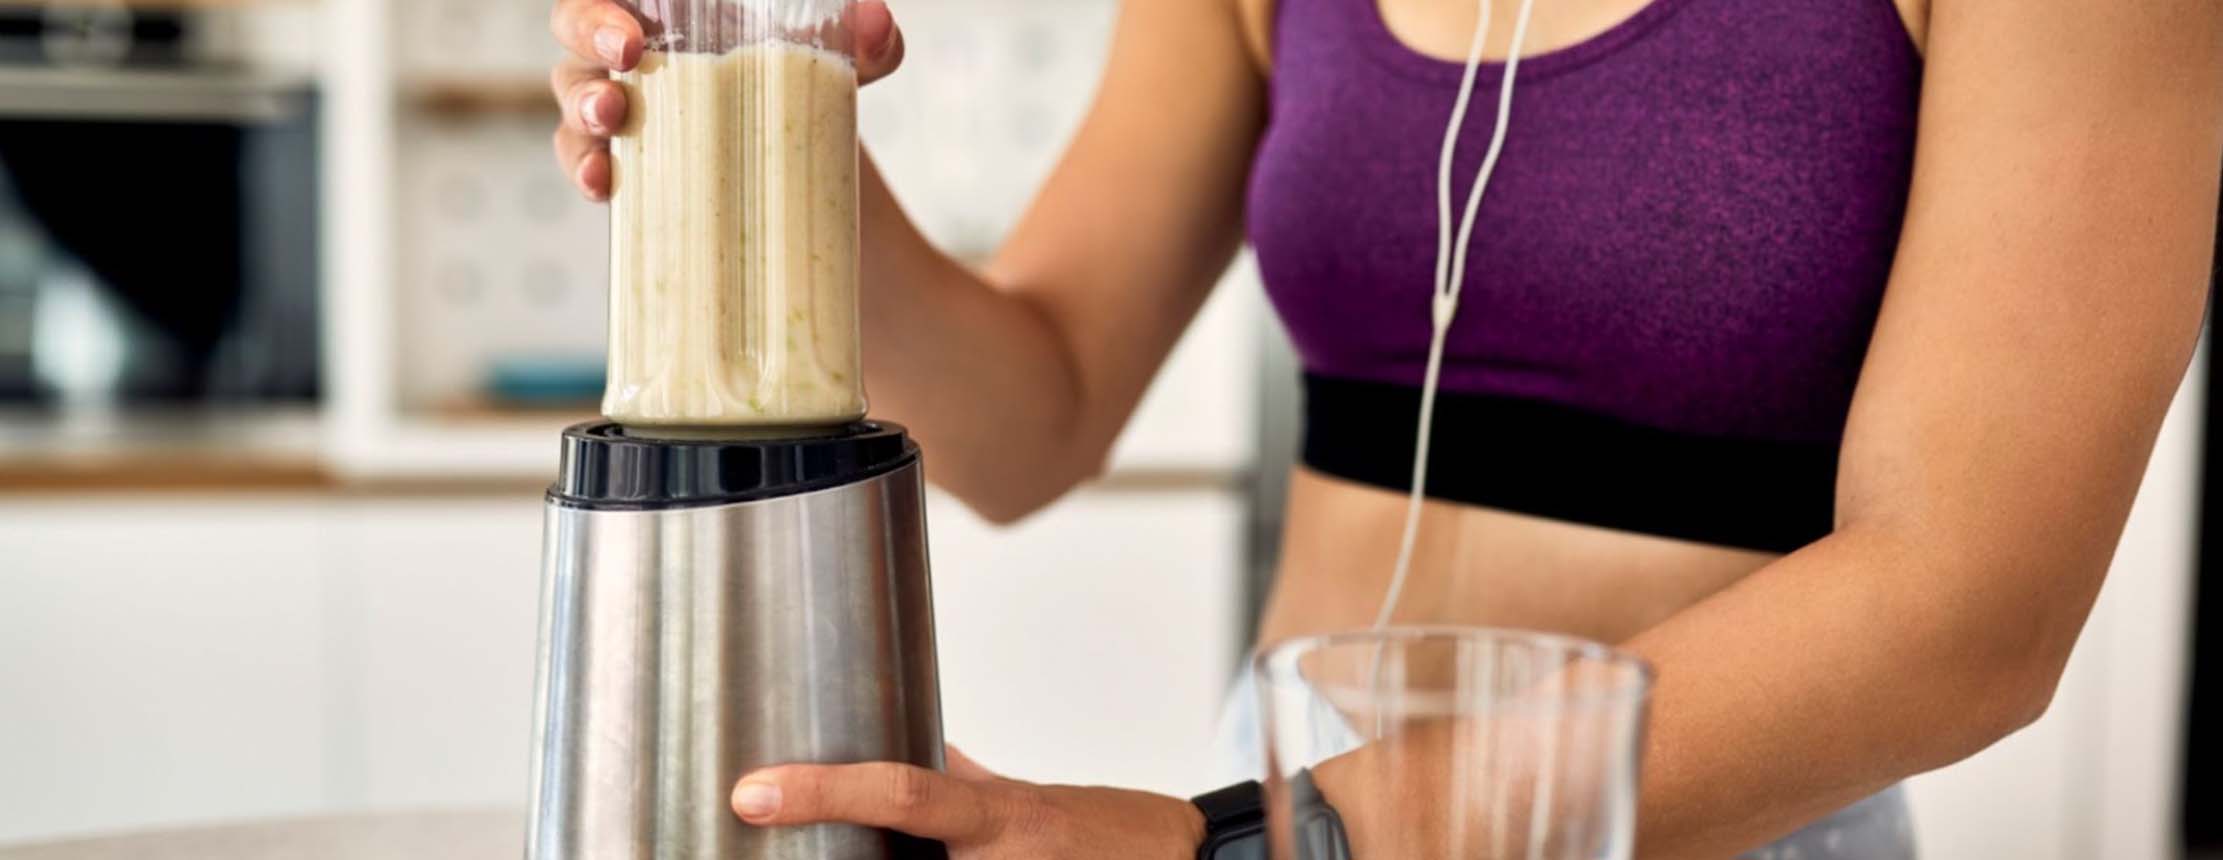 Athletic woman using blender and preparing smoothie in the kitchen.